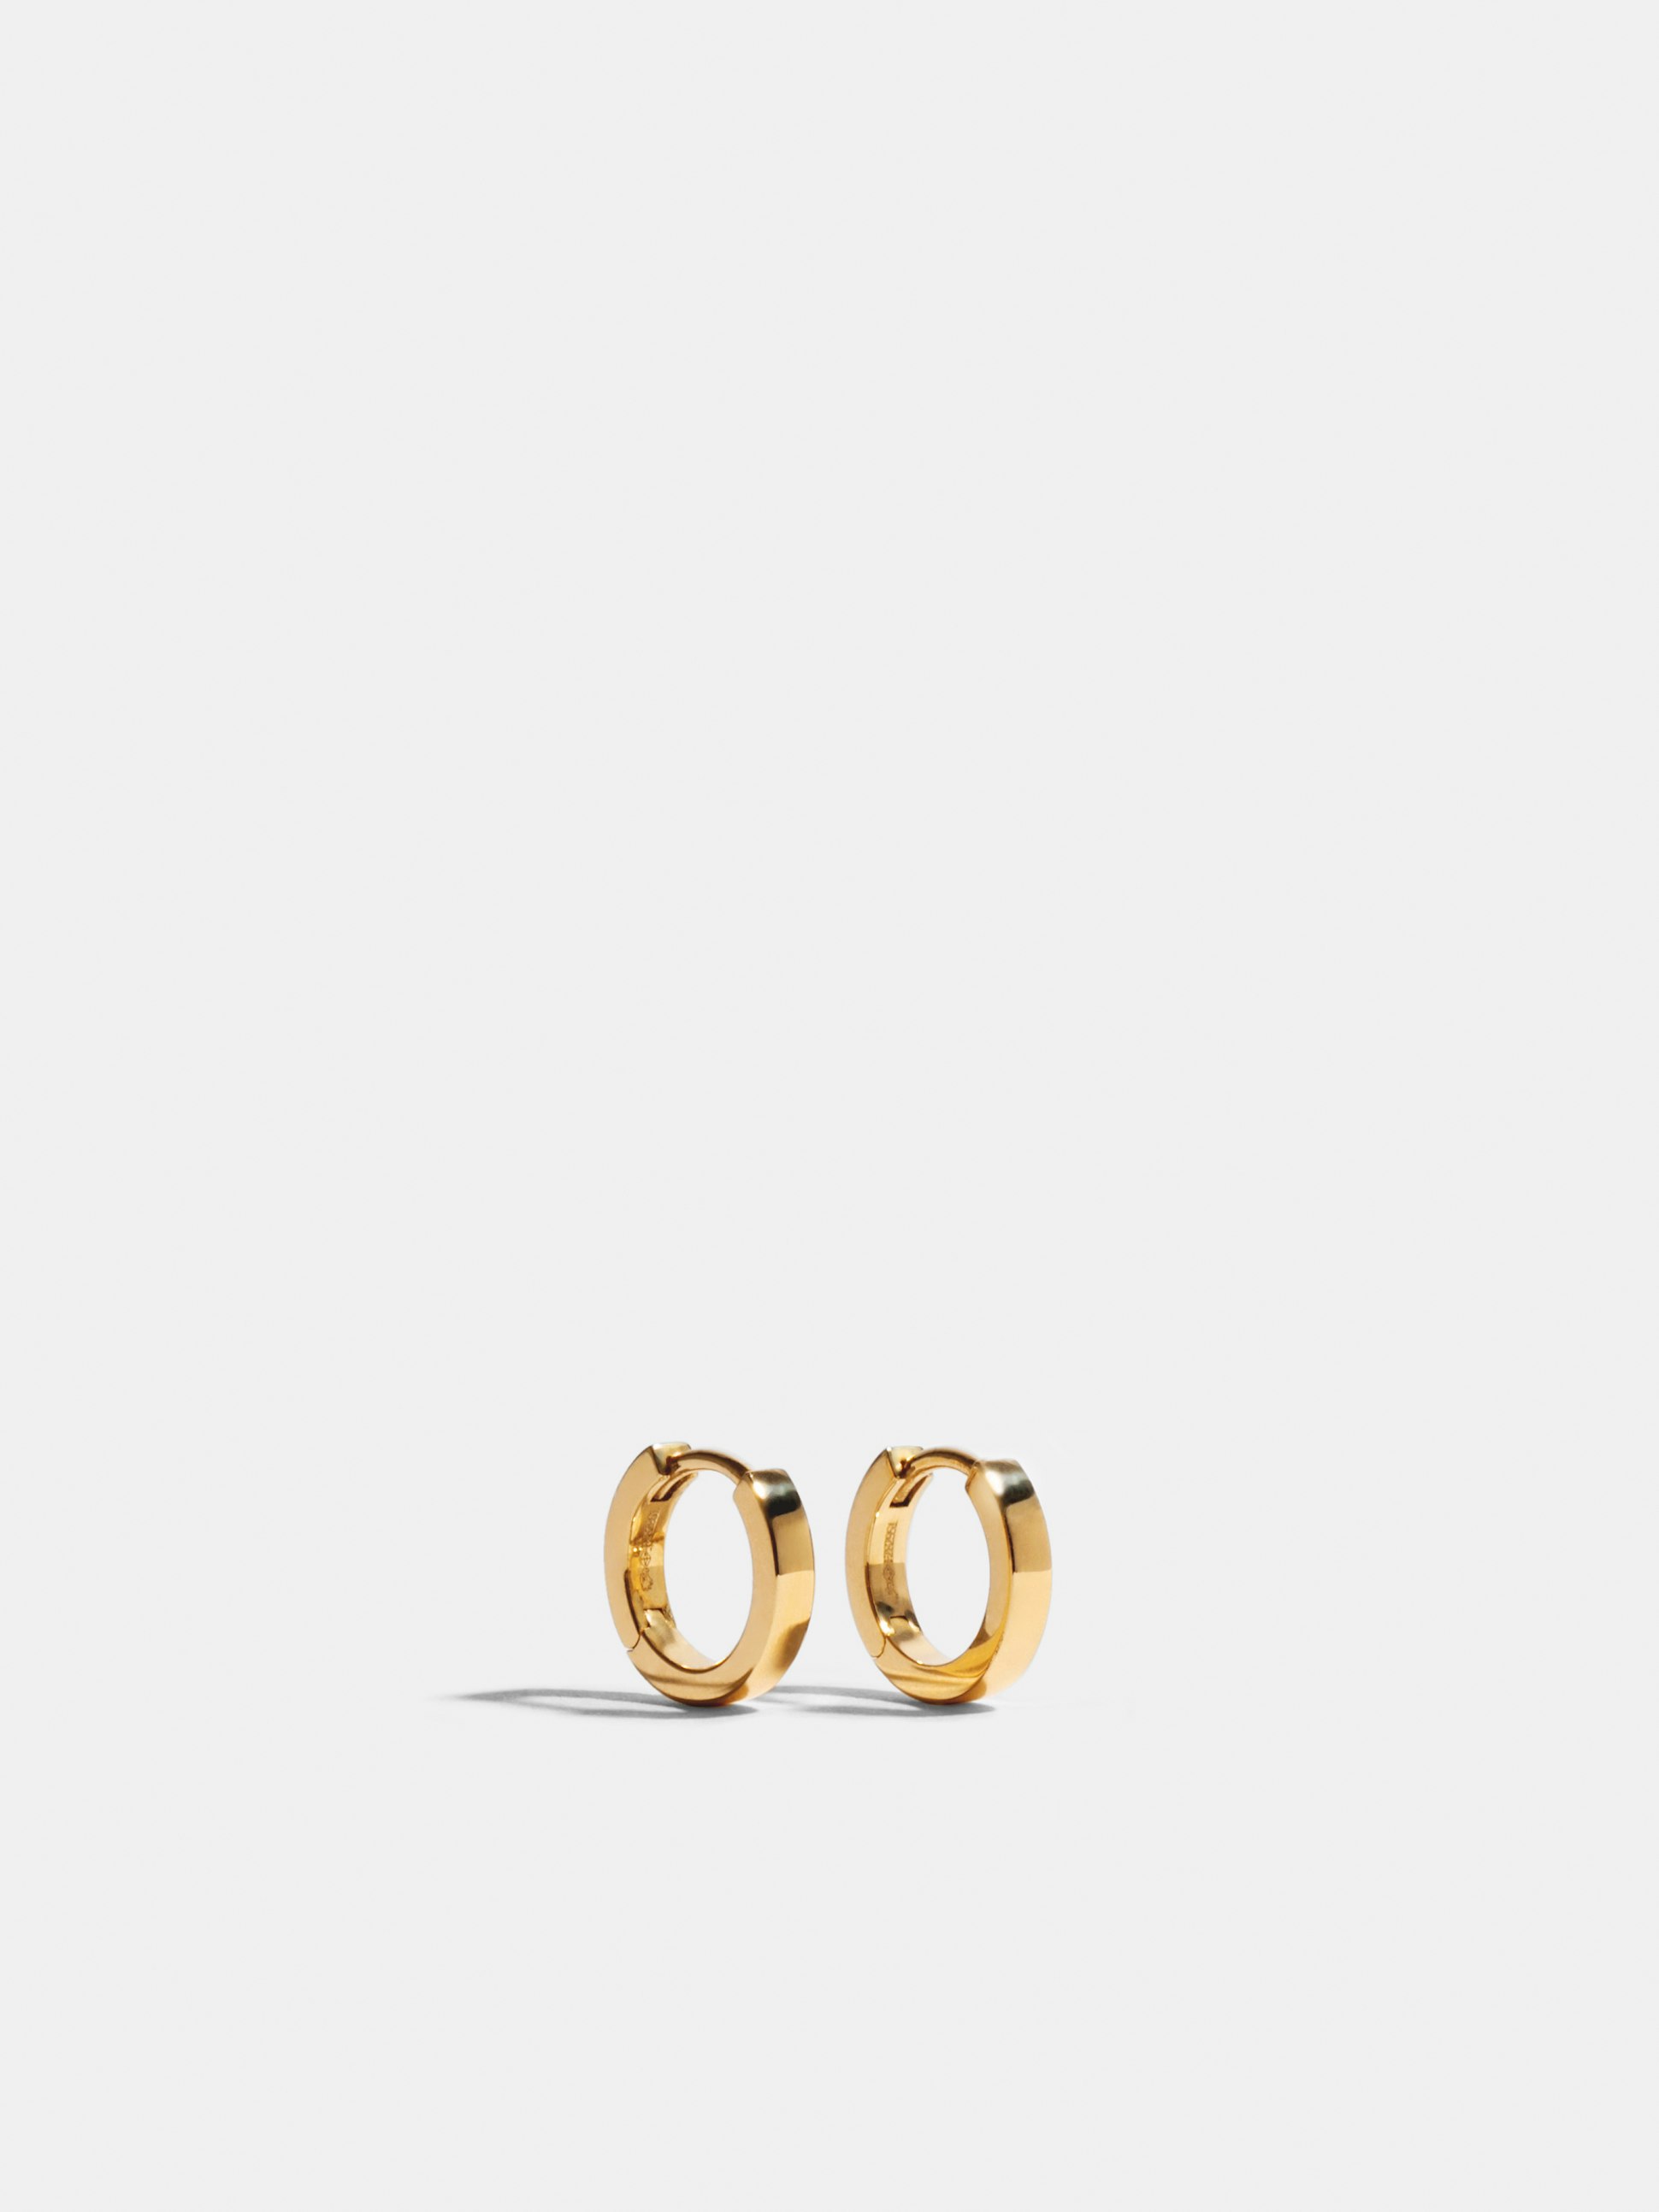 Sillons earrings in 18k Fairmined ethical yellow gold, 10mm (1 row), the pair.